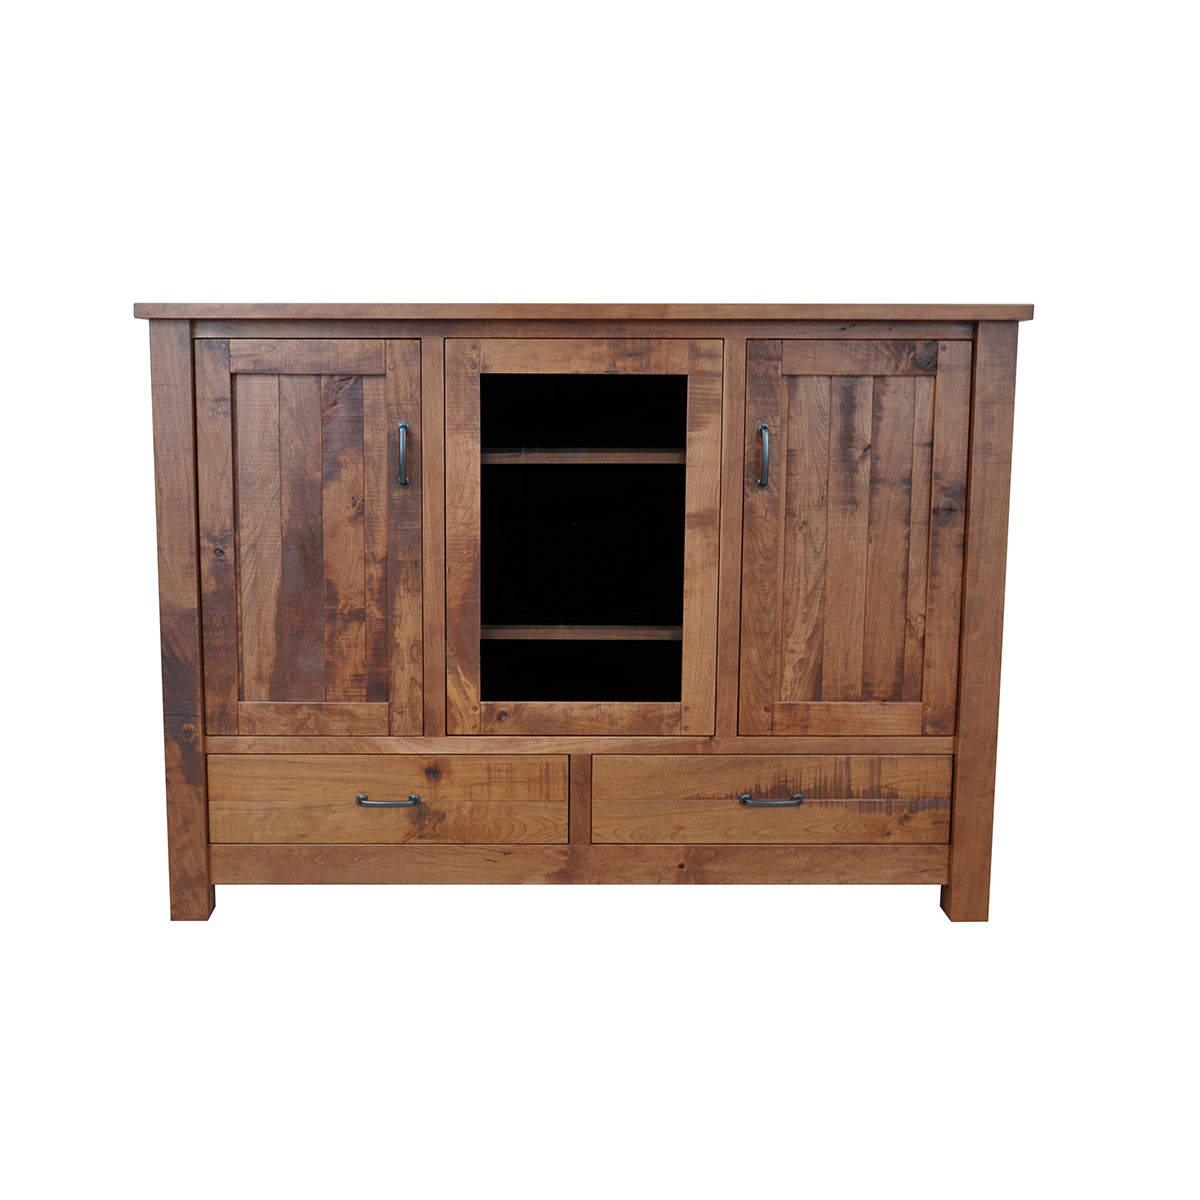 Planked Rustic Entertainment Center 